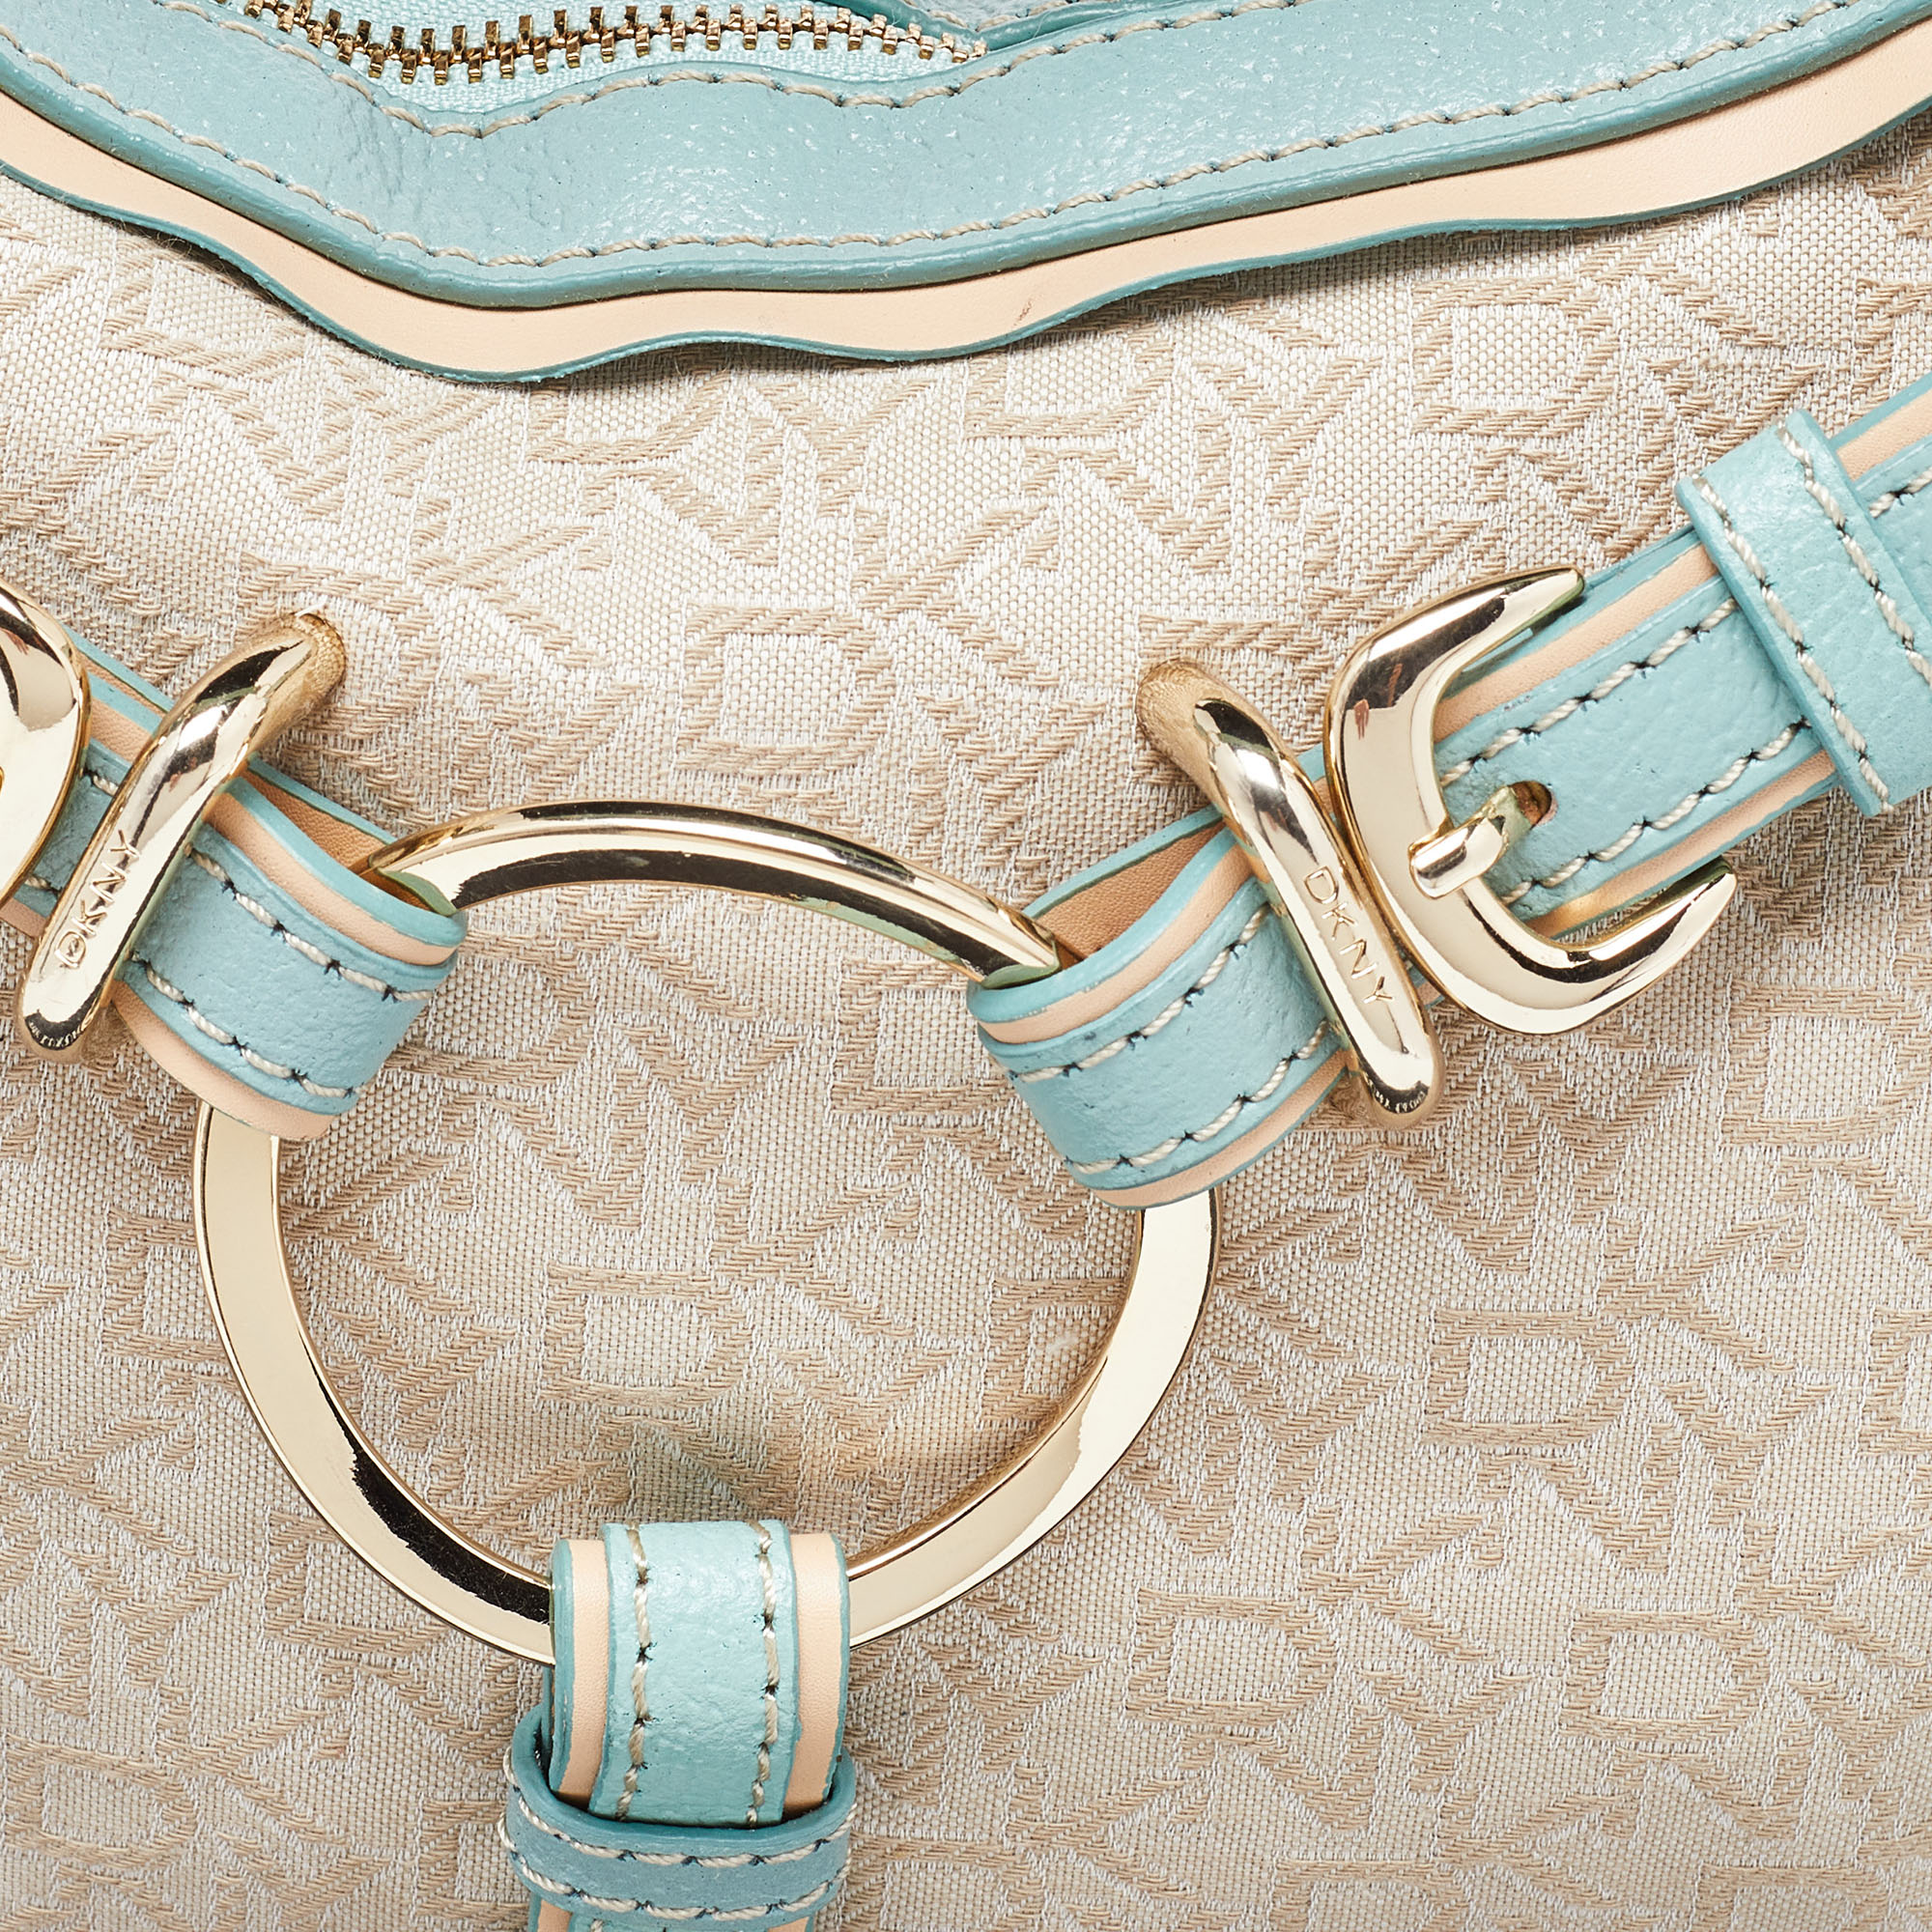 DKNY Cream/Blue Monogram Canvas And Leather Buckle Hobo